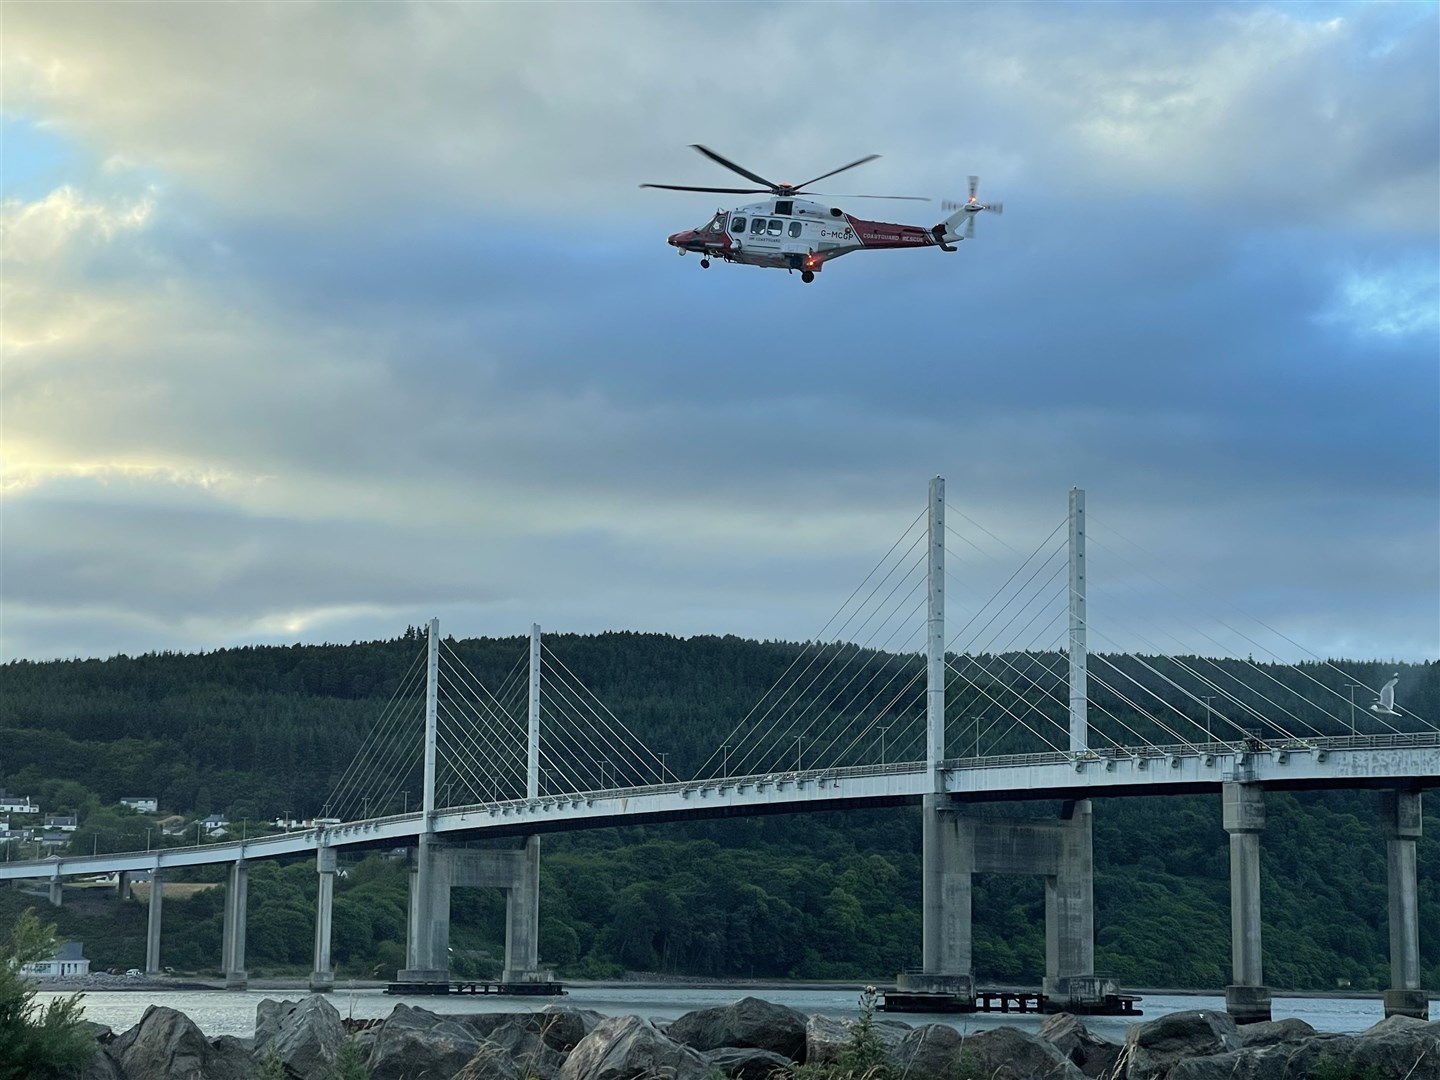 The emergency services were called to the Kessock Bridge after concerns were raised for a young woman.